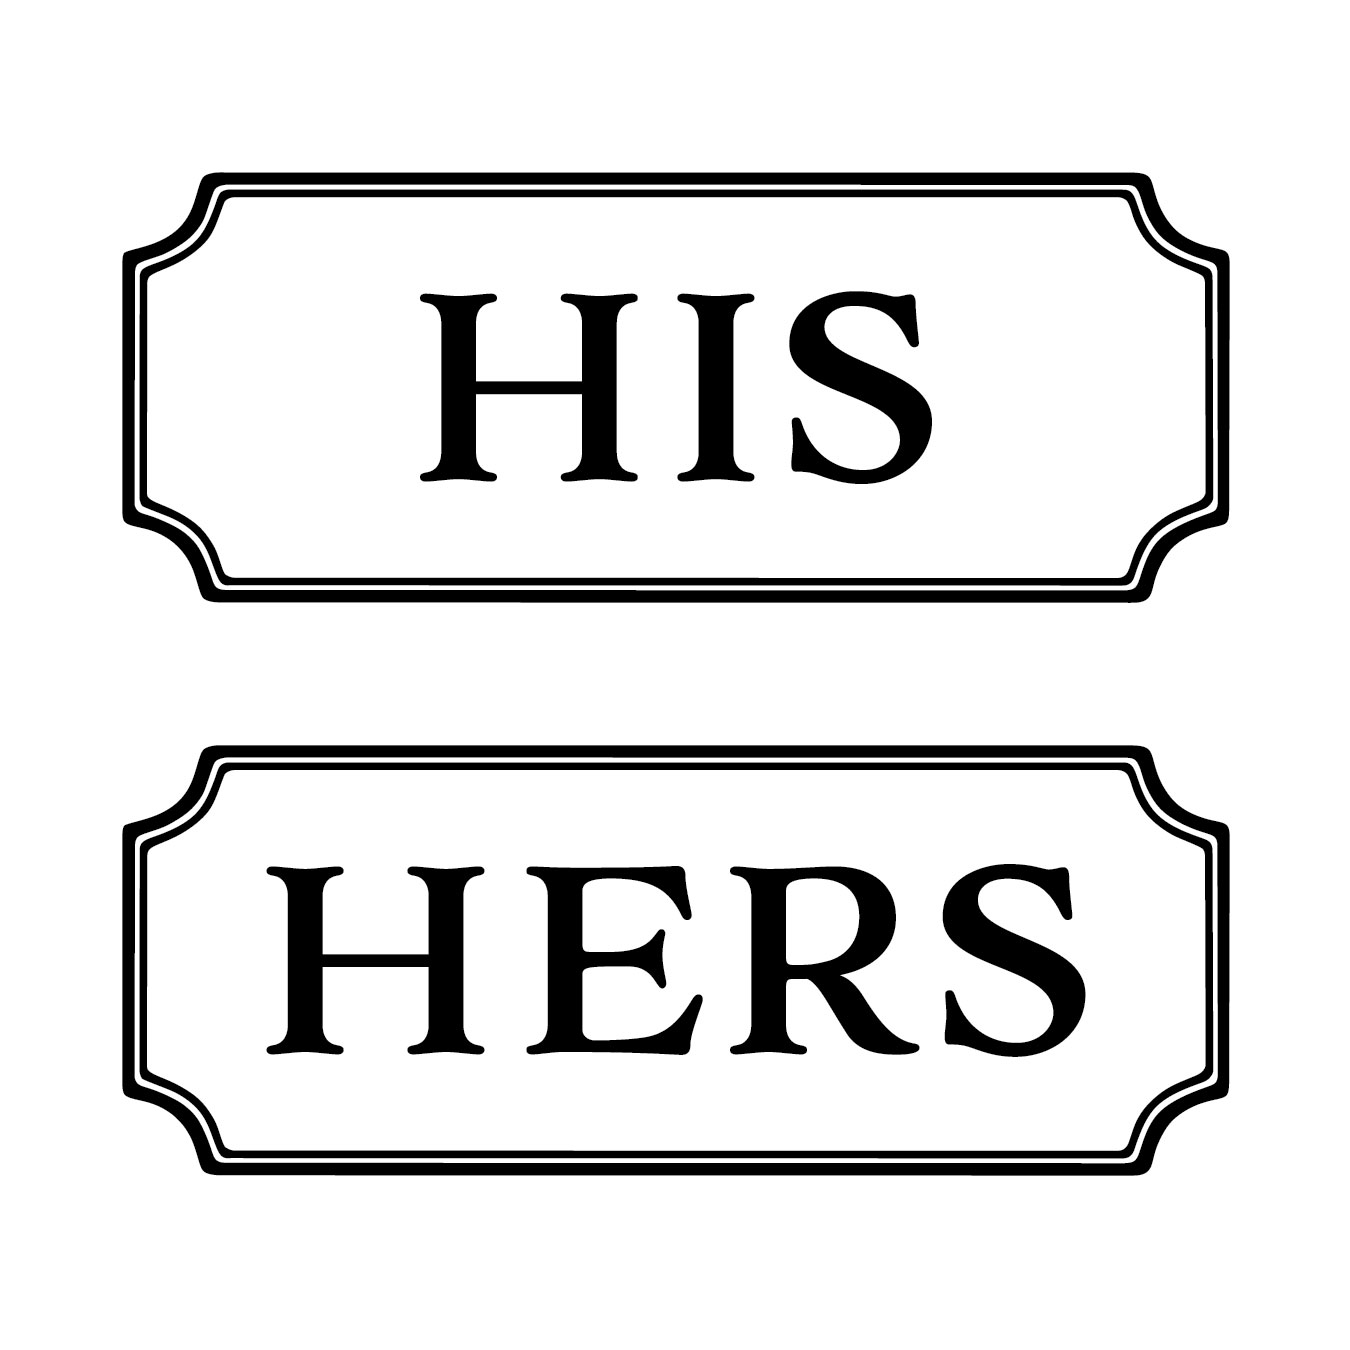 His and Hers Vinyl Lettering Wall Decal Sticker Bathroom Decals